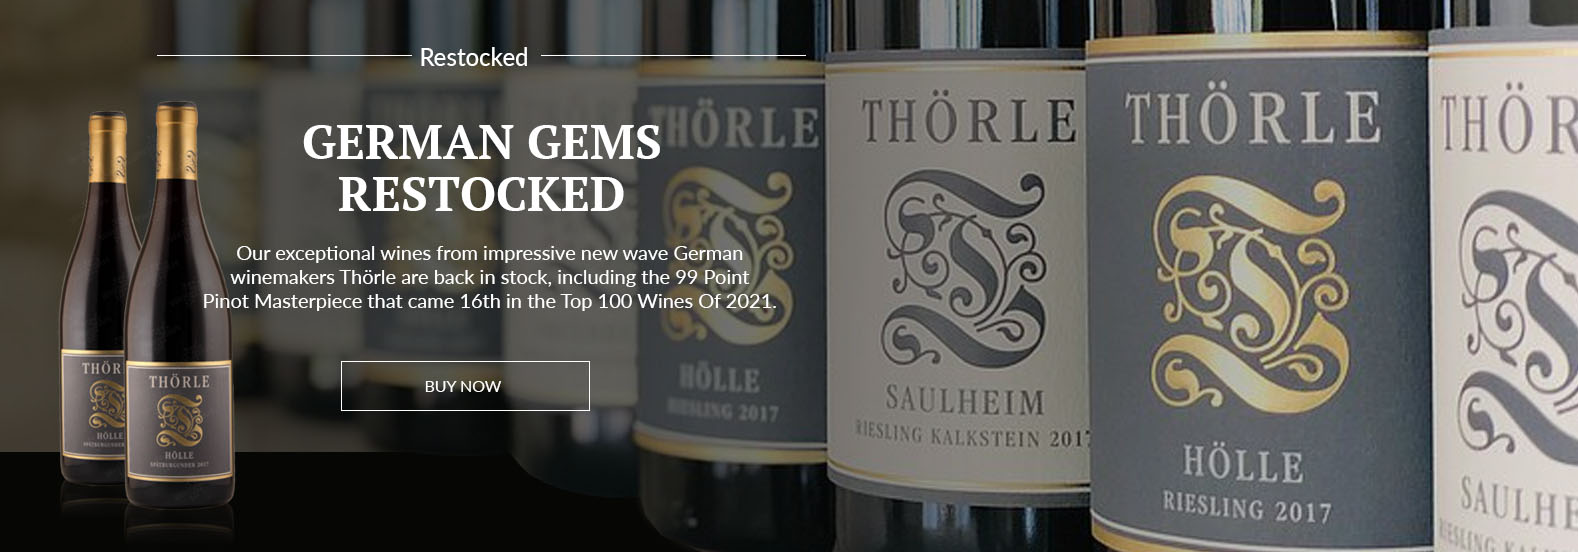 German Gems Restocked - Including a 99 Point Pinot "Masterpiece"